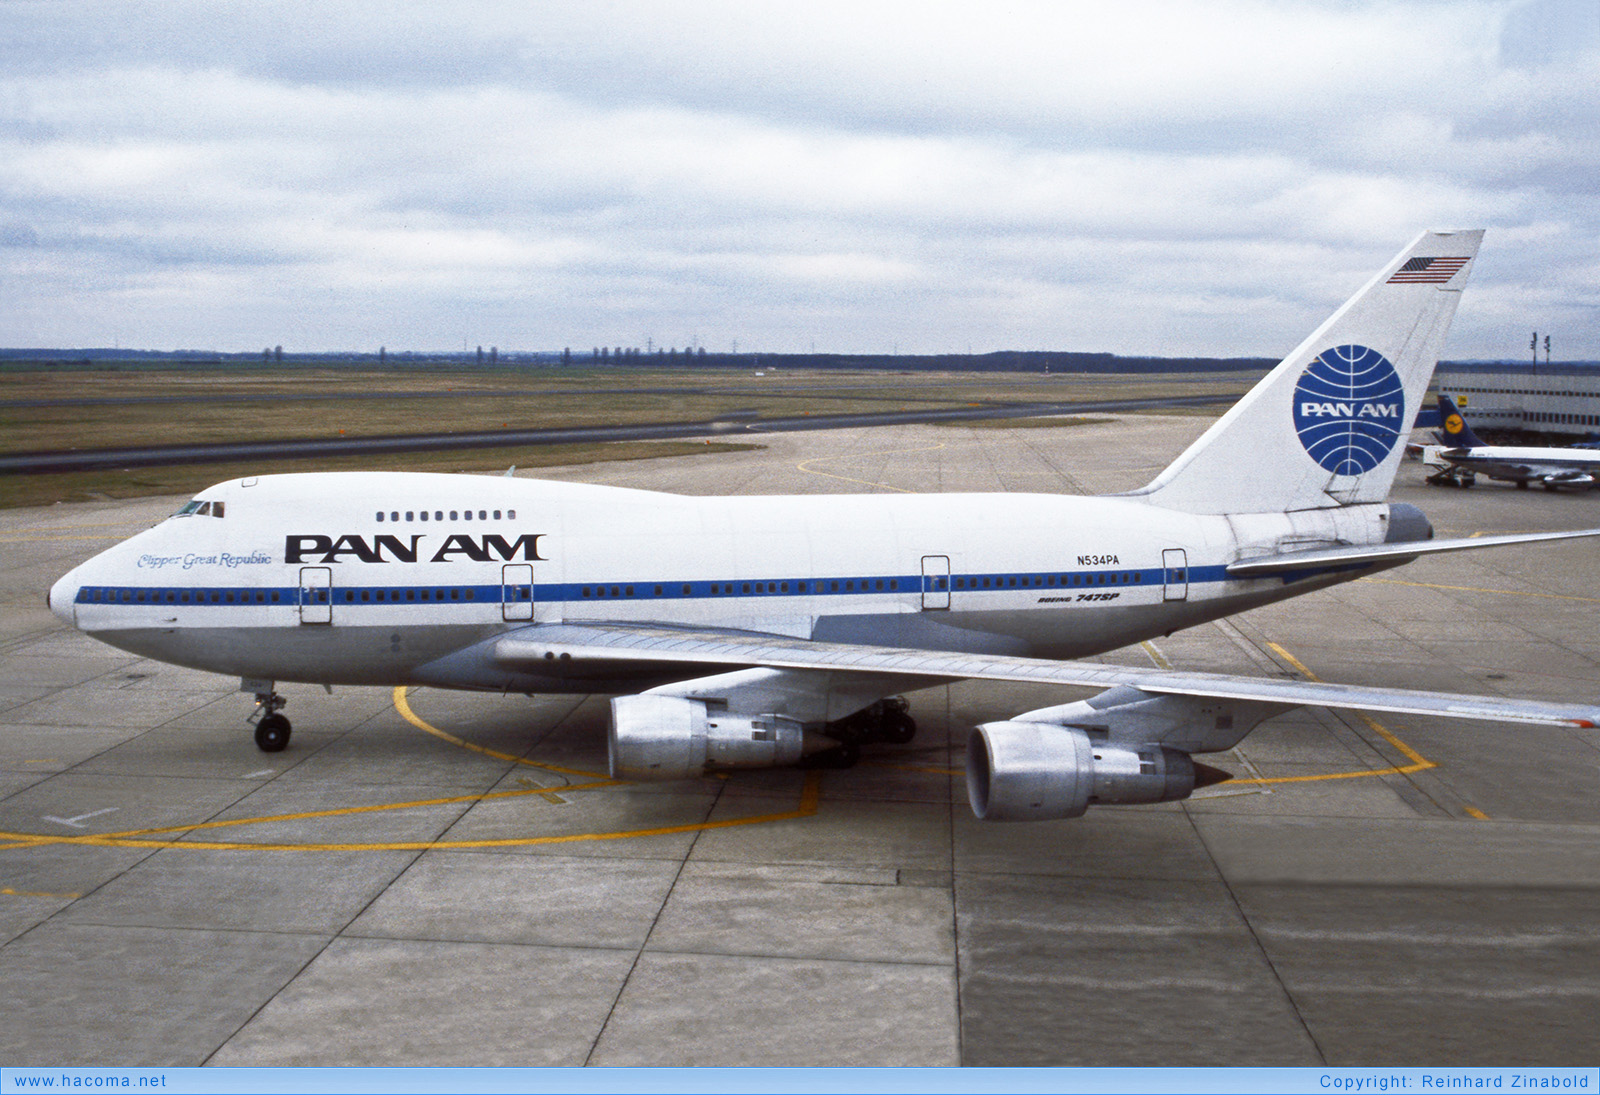 Photo of N534PA - Pan Am Clipper Great Republic - Dusseldorf Airport